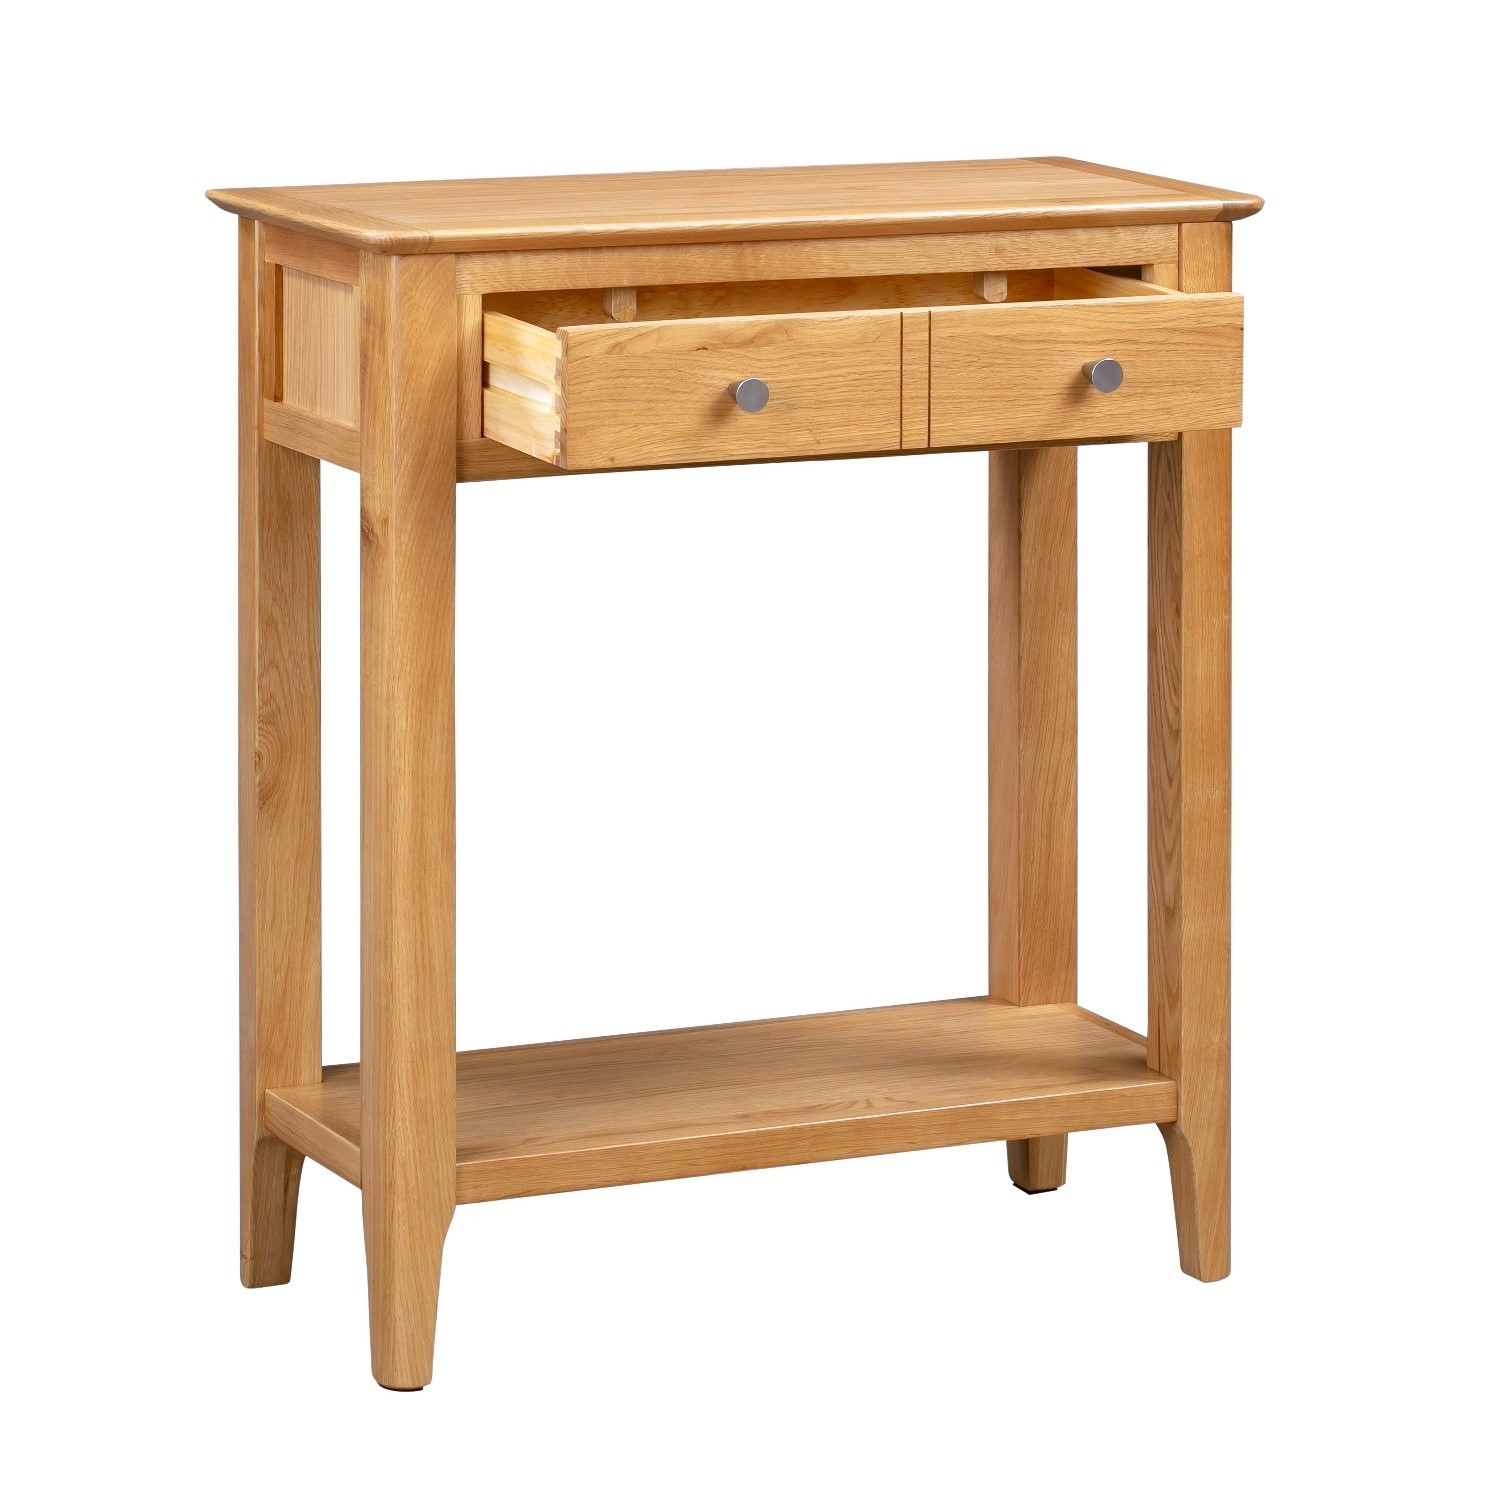 Narrow Solid Oak Console Table With, Very Narrow Console Table With Drawers